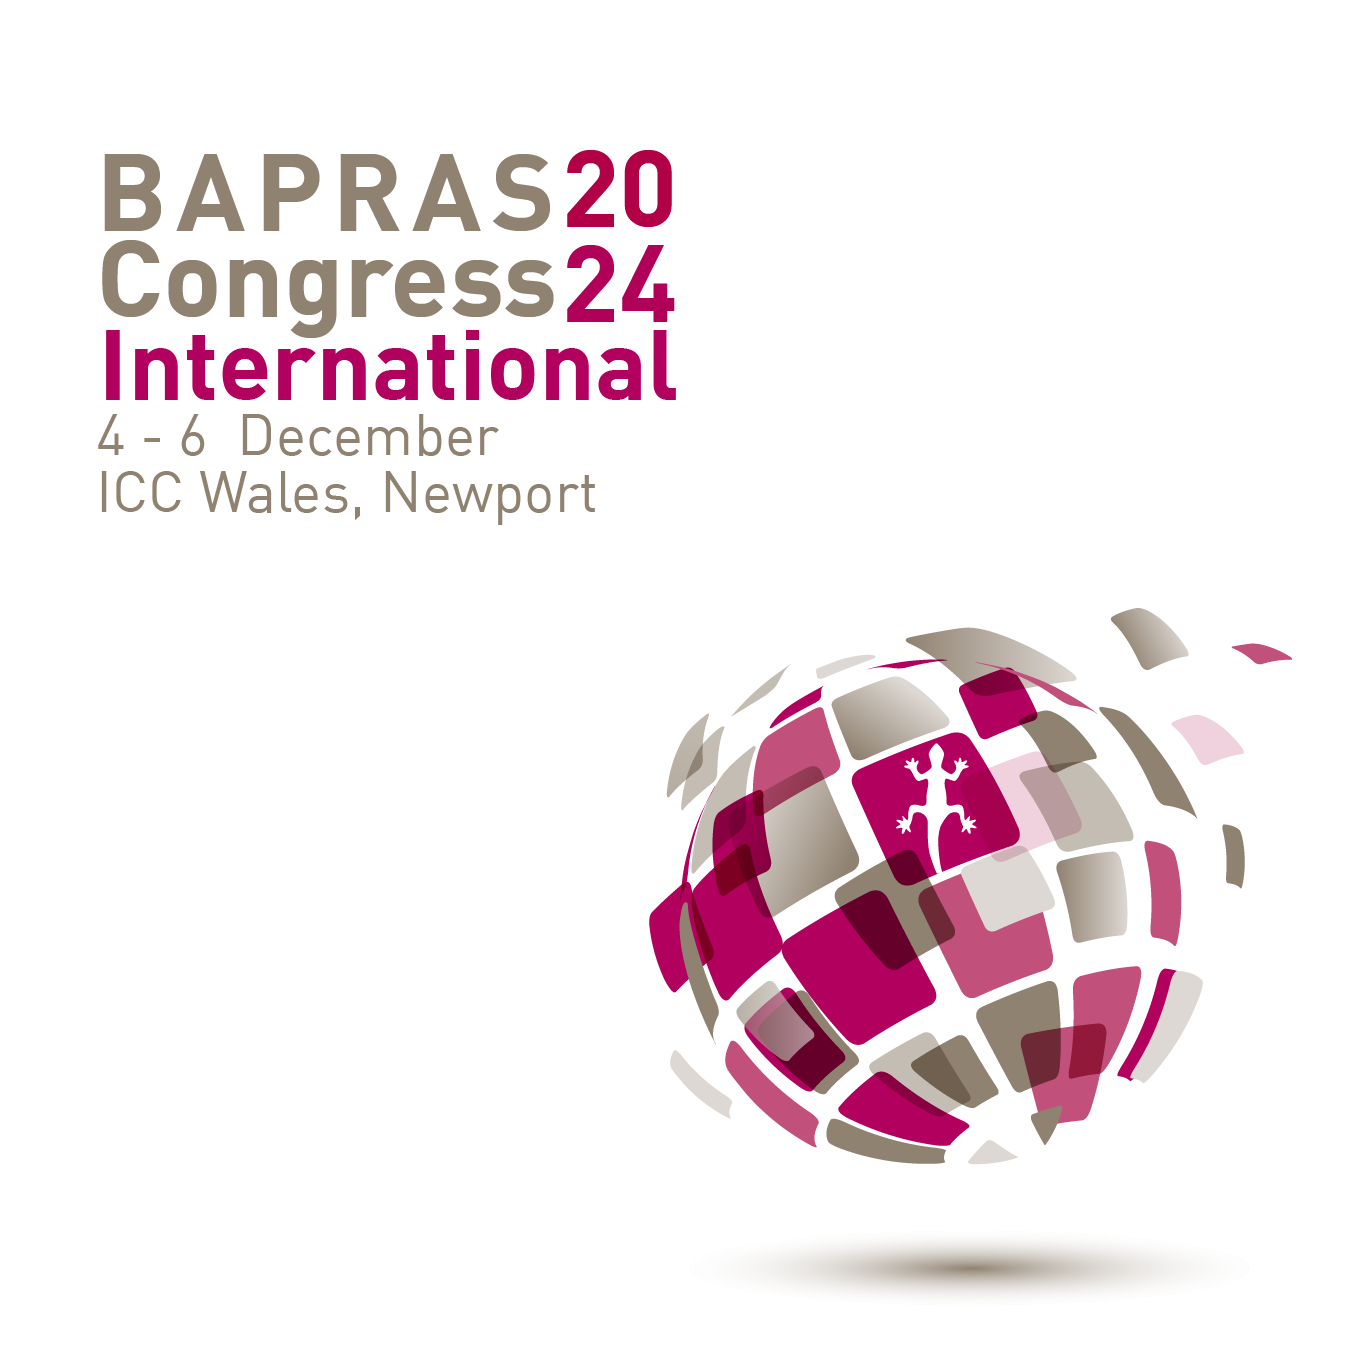 Registration is now open for BAPRAS Congress 2024